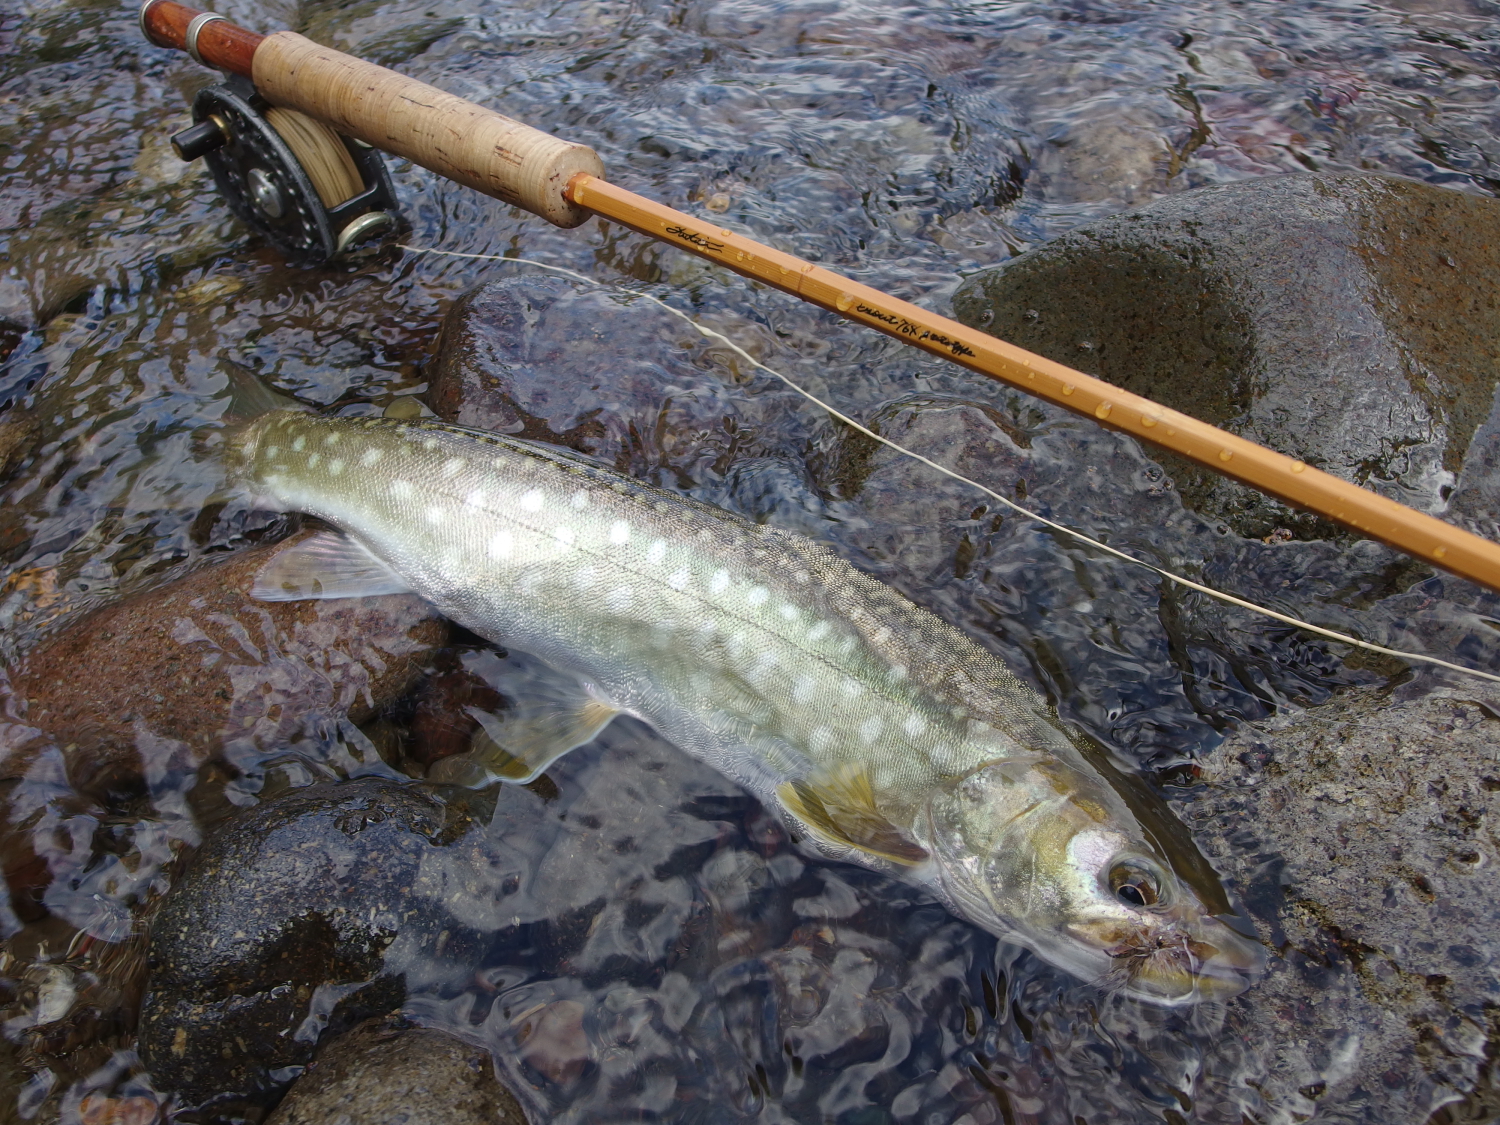 4:36 pm Central Hokkaidocentral, Japan / Water temperature: - / Hatch: caddis/ Fly: caddis #12